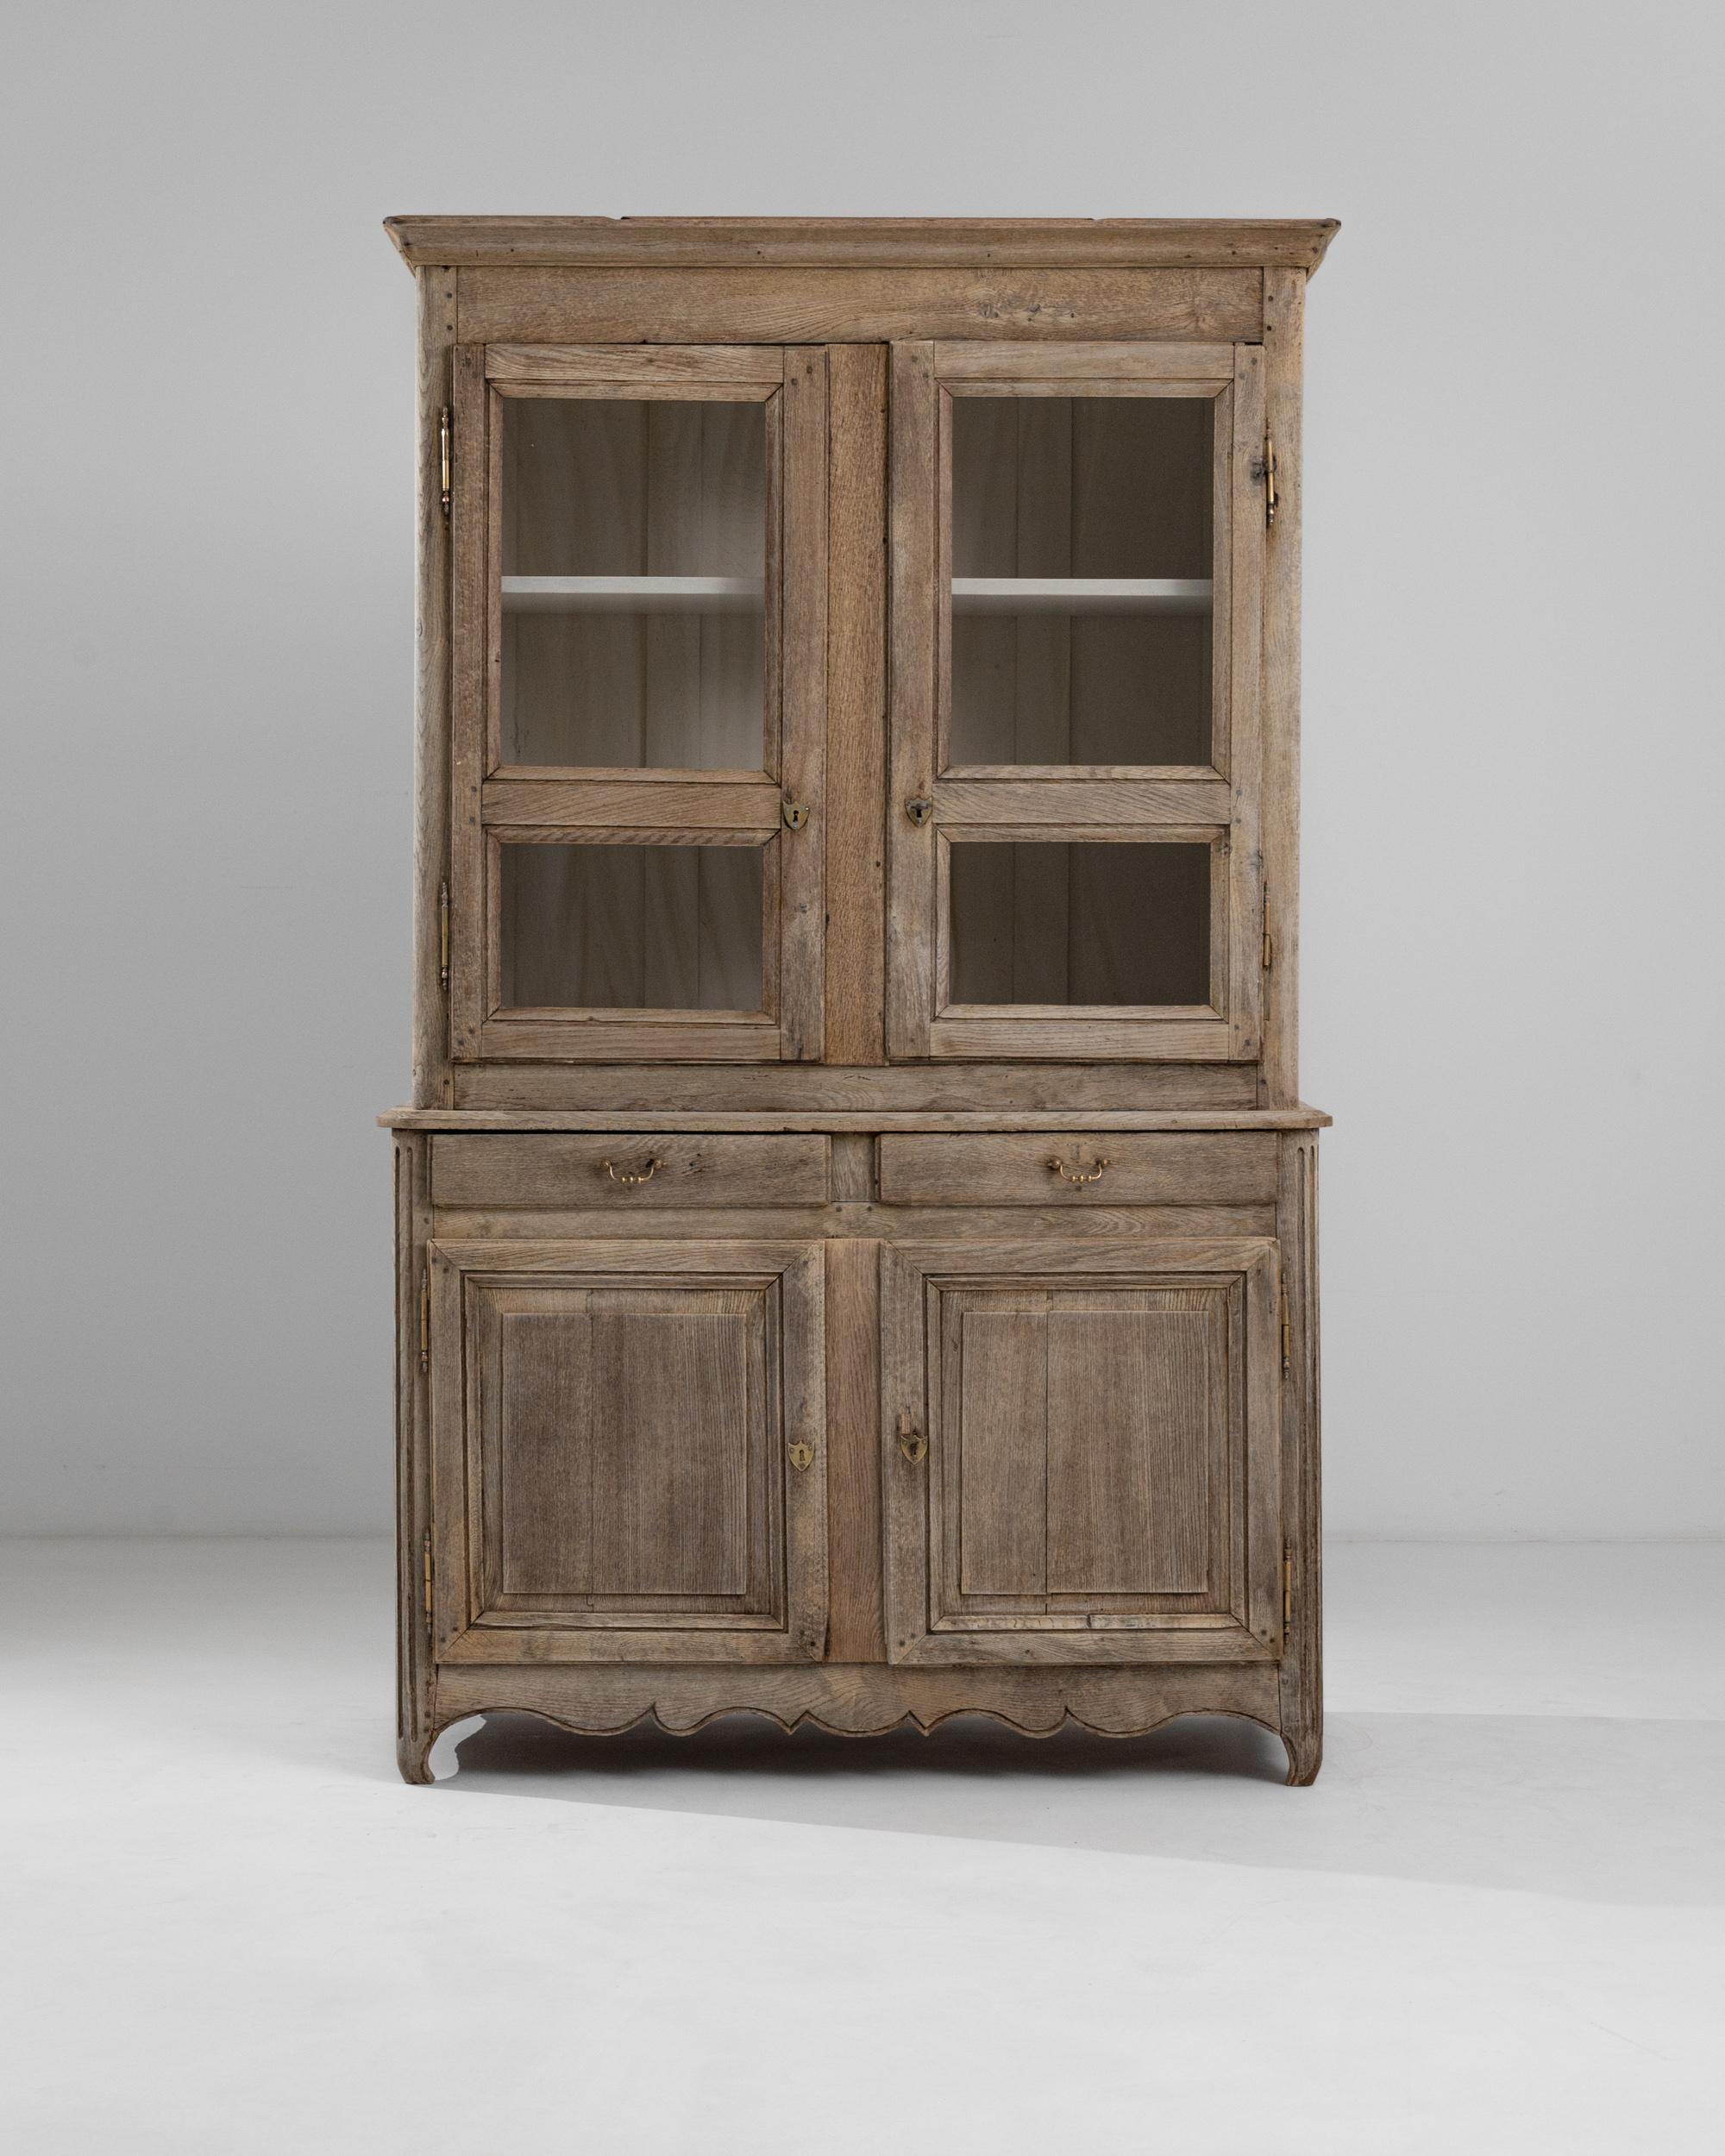 This antique oak vitrine offers a slice of French provincial charm. Built in France at the beginning of the 19th century, this piece would have been a prized possession in an elegant farmhouse kitchen or rural chateau. The windows of the upper